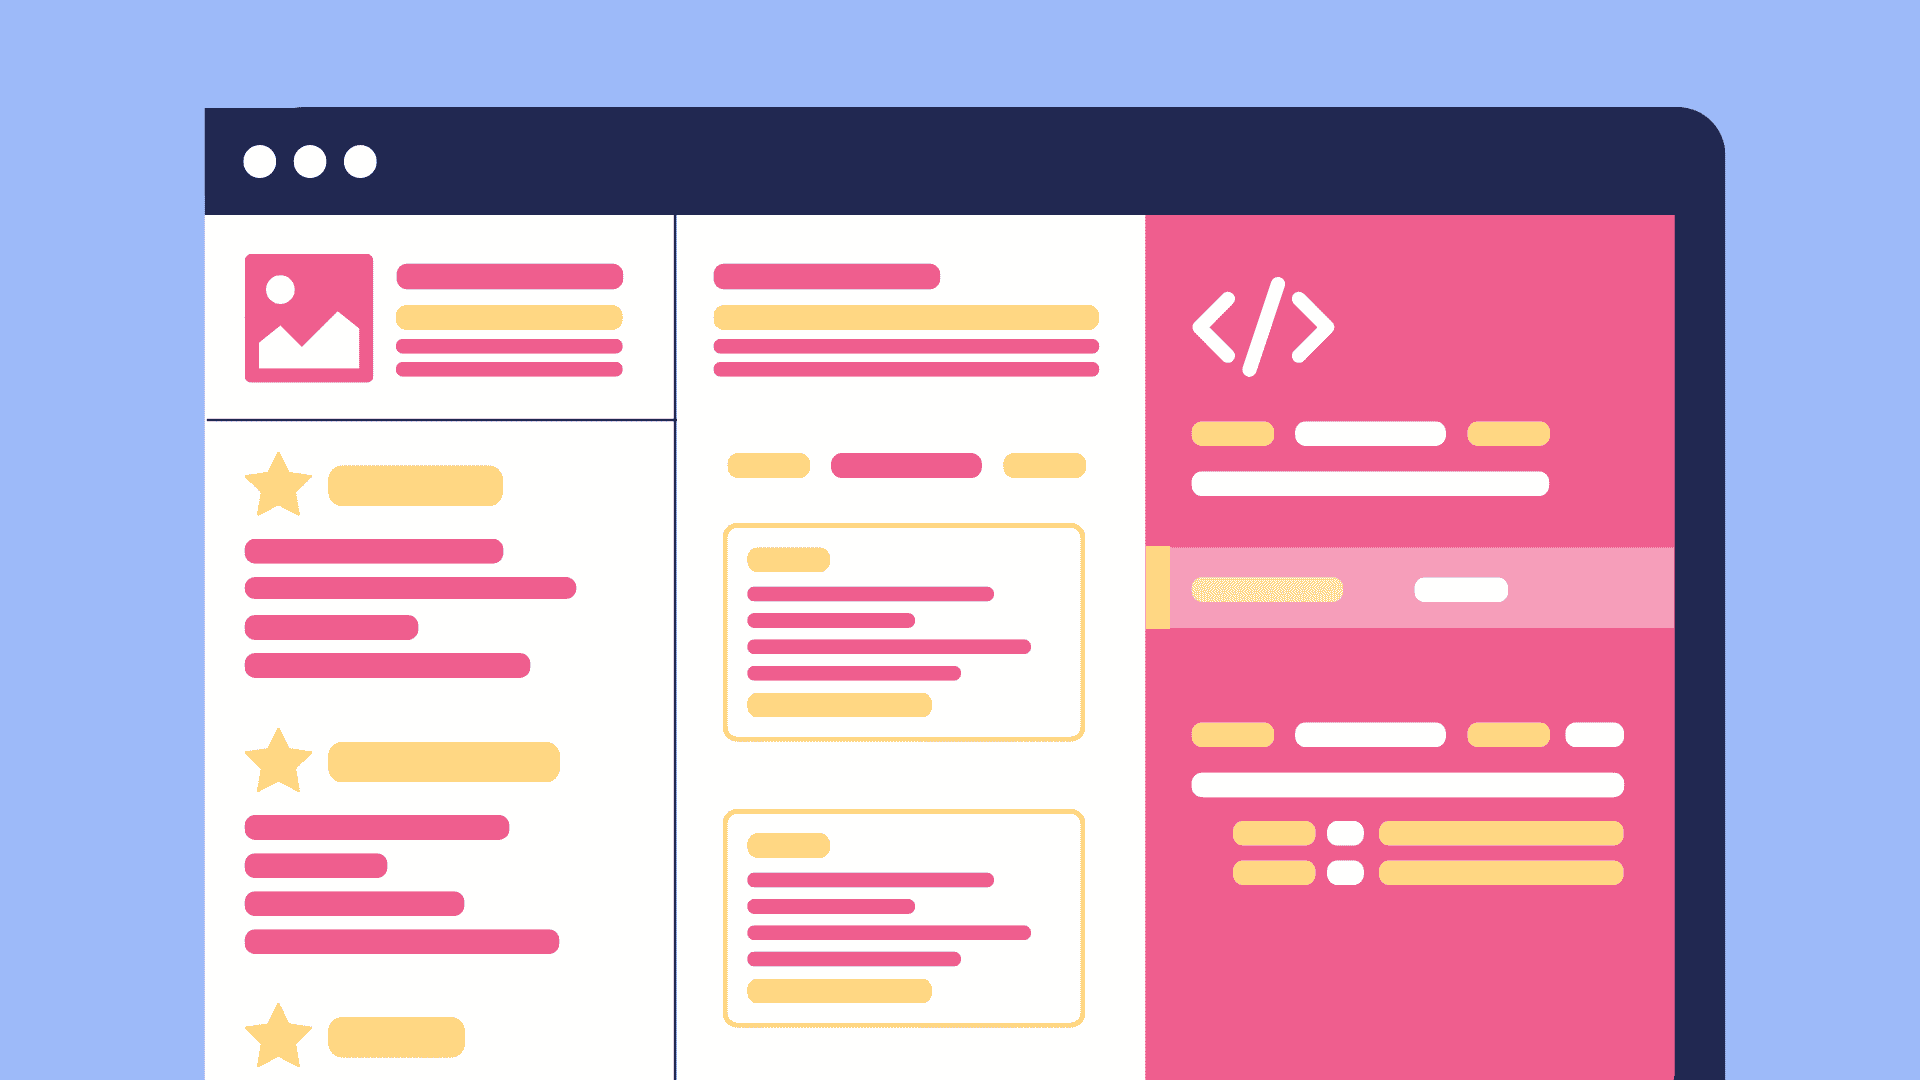 What are some API documentation best practices